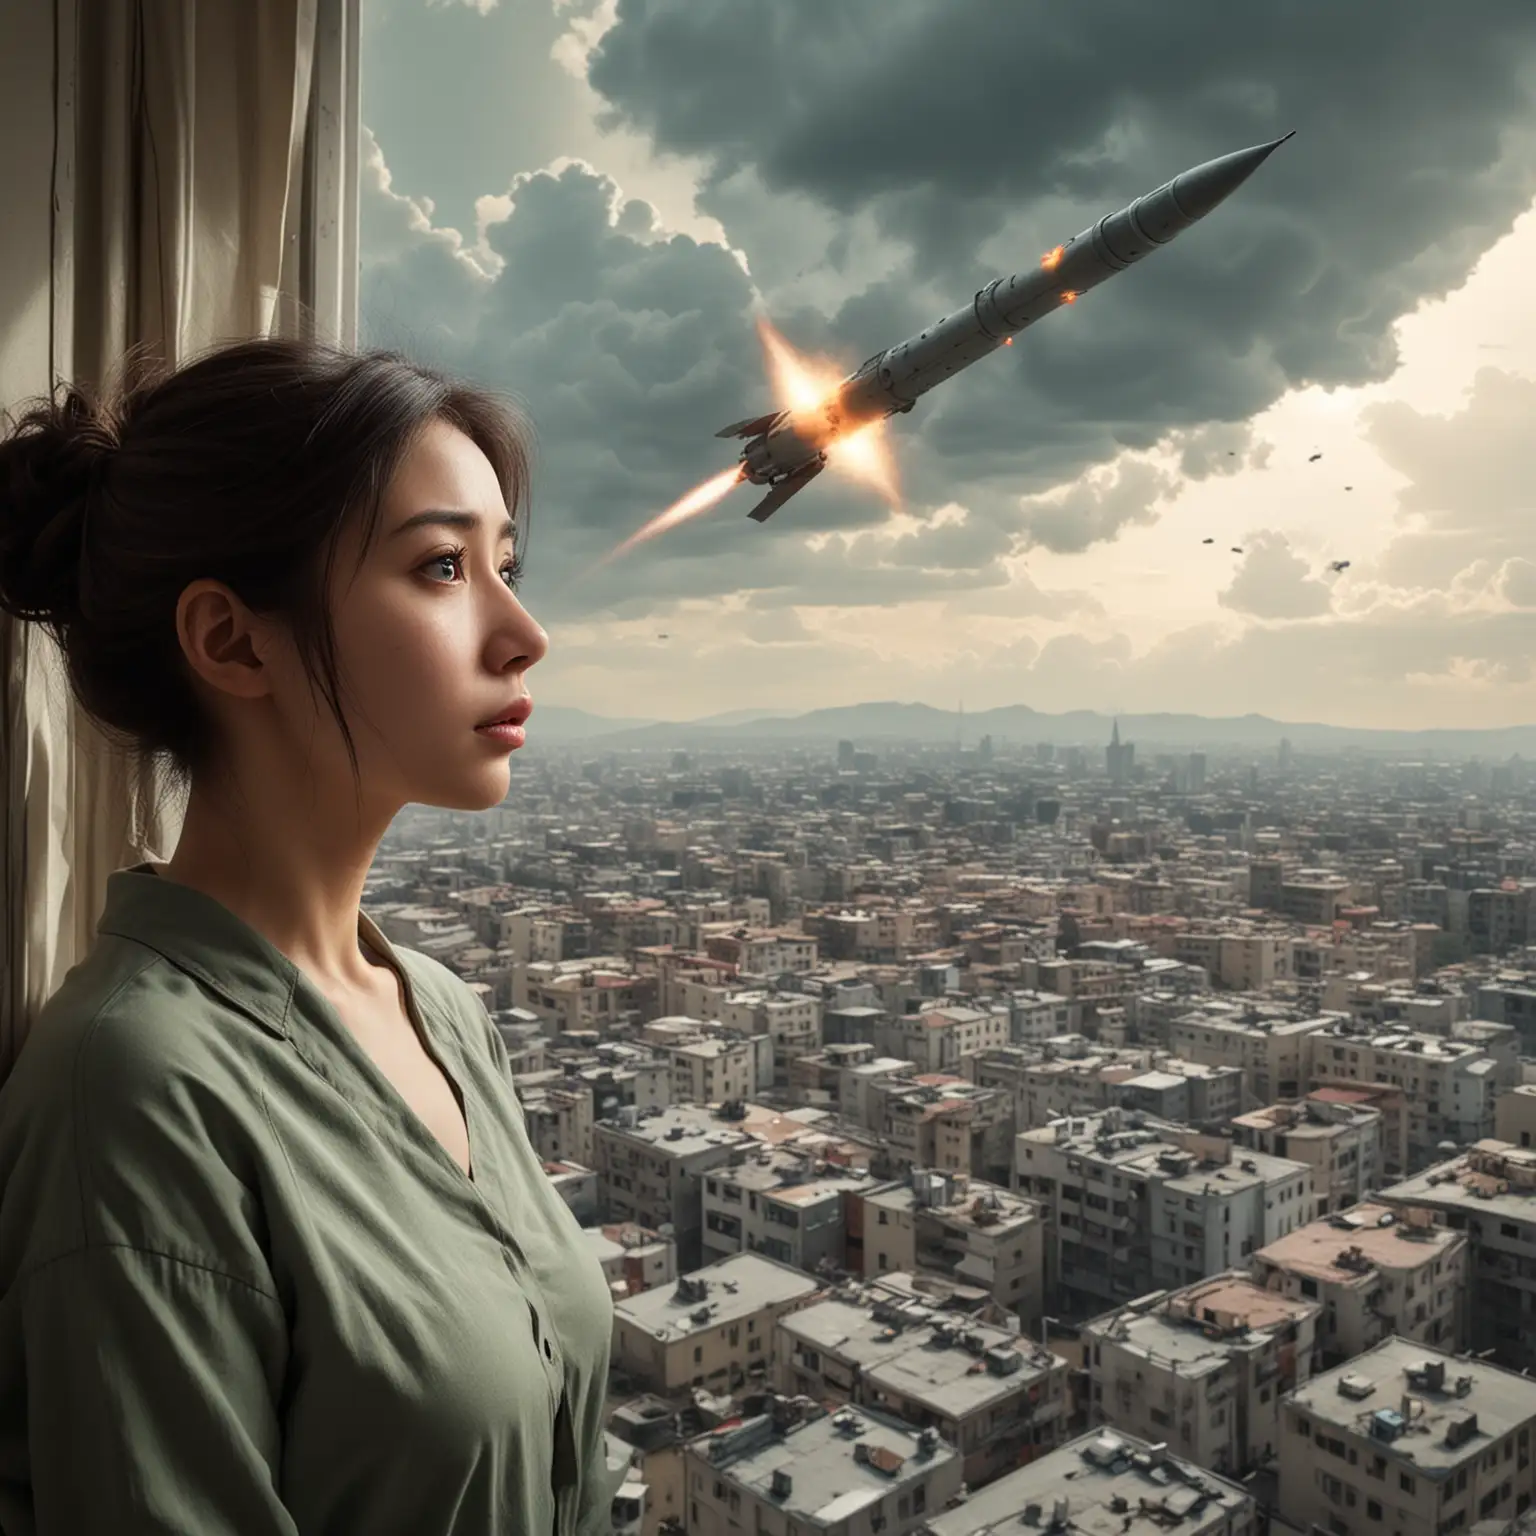 Anxious Person Watching Aerial Missile in Peaceful Setting